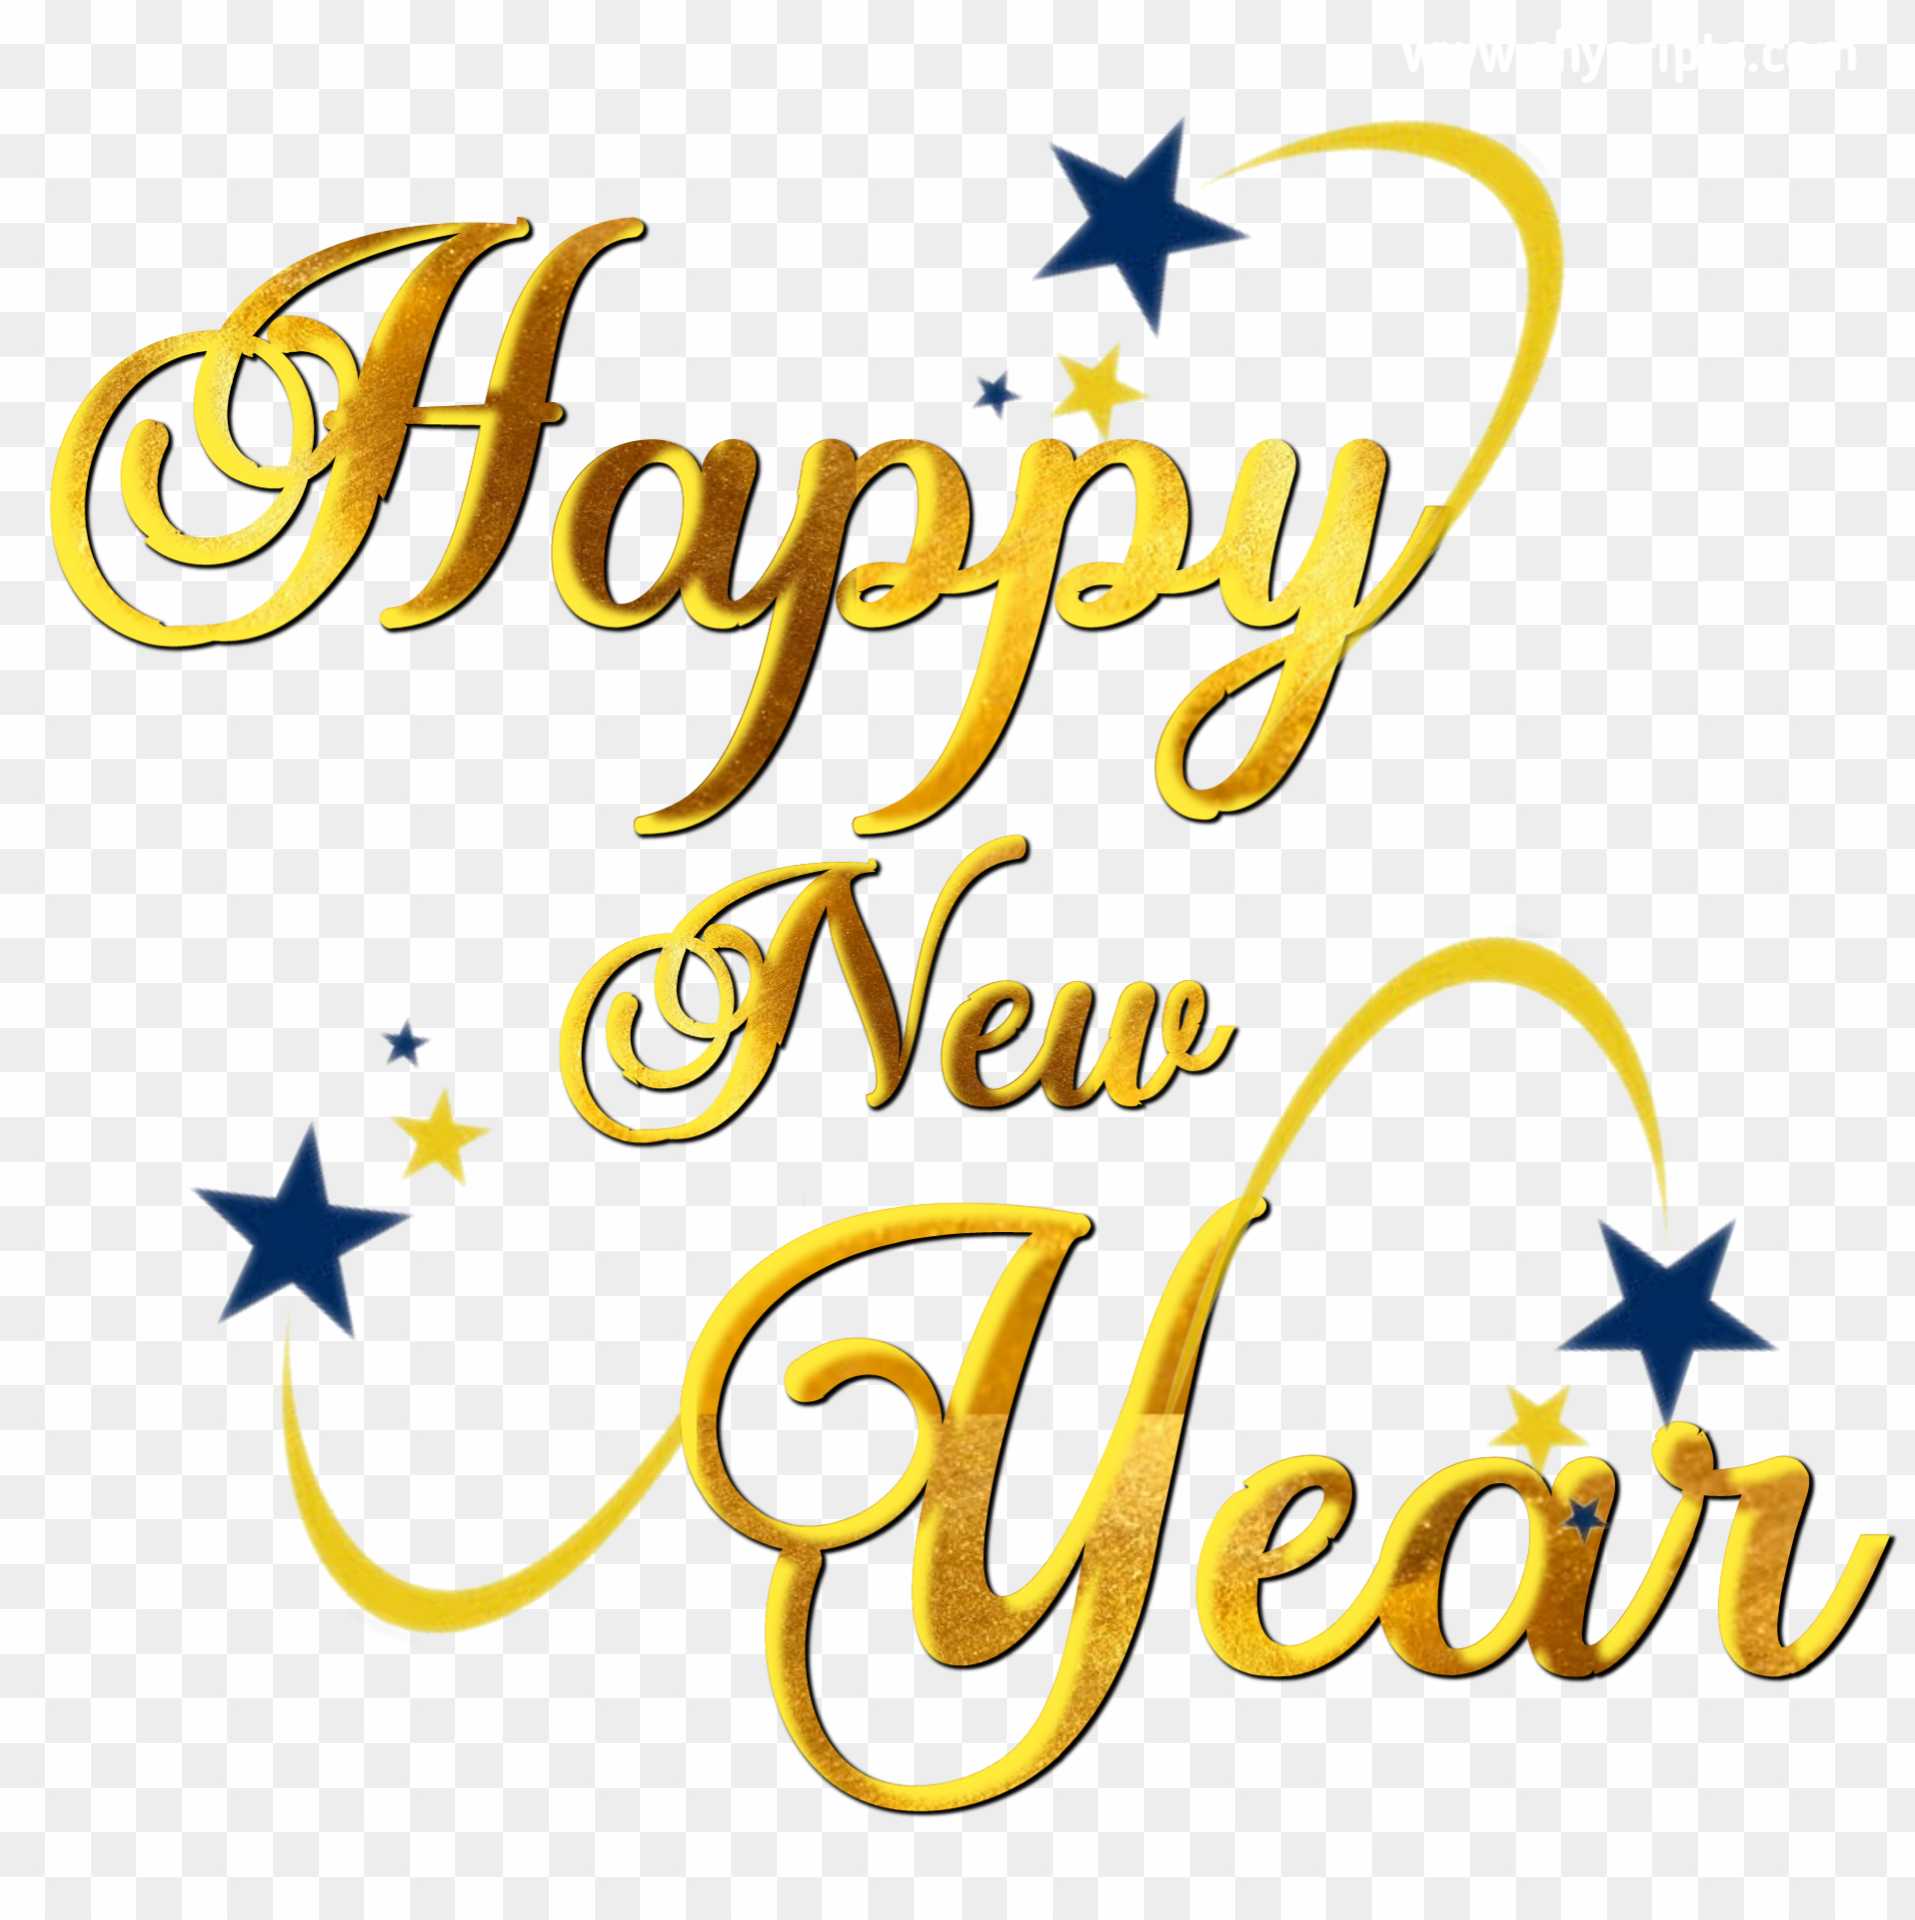 New Year PNG transparent image download, size: 2500x890px